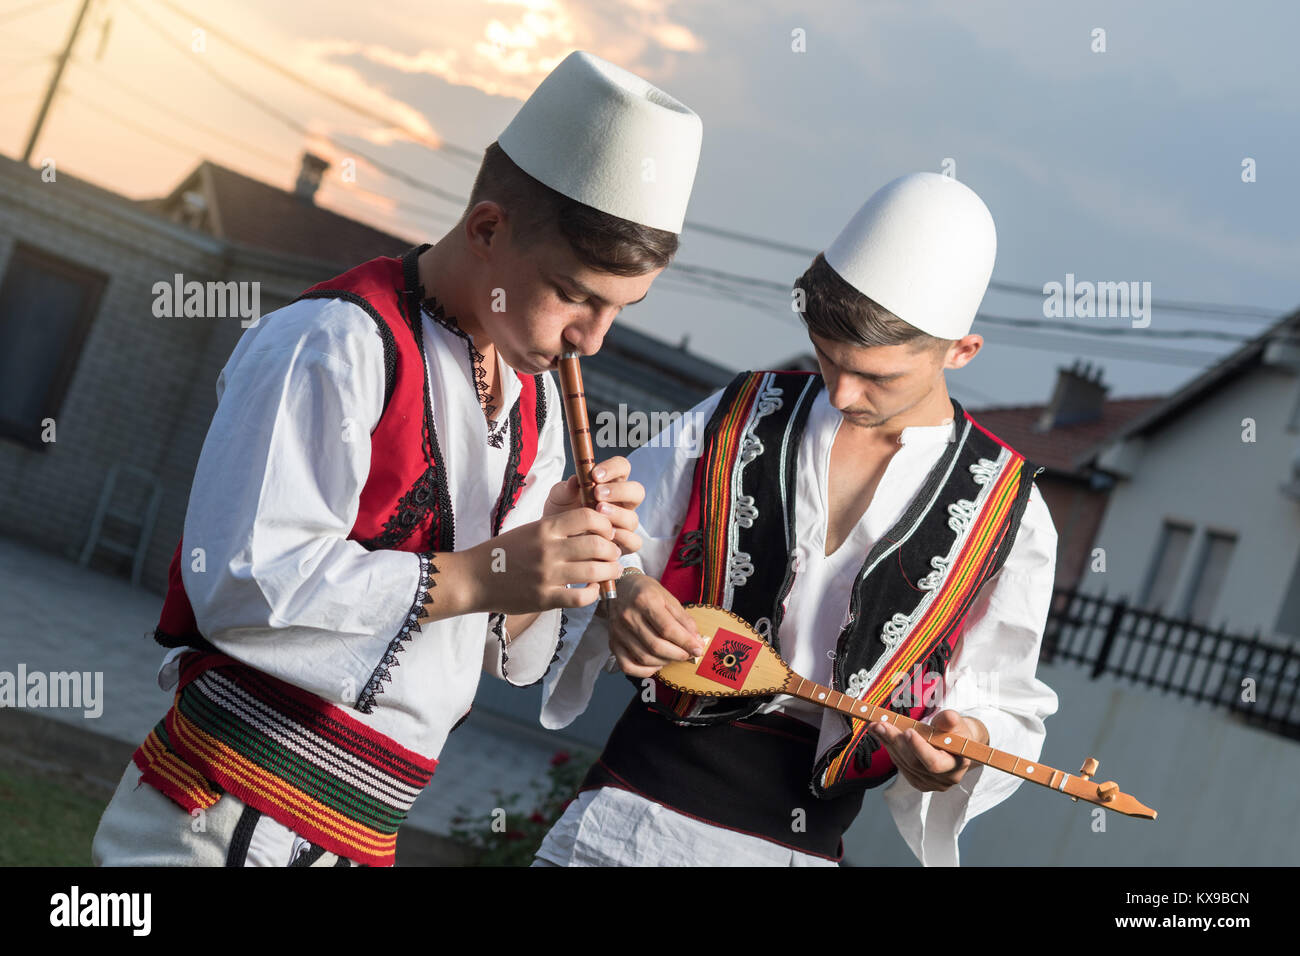 teen-boys-in-traditional-albanian-costume-playing-music-with-flute-KX9BCN.jpg